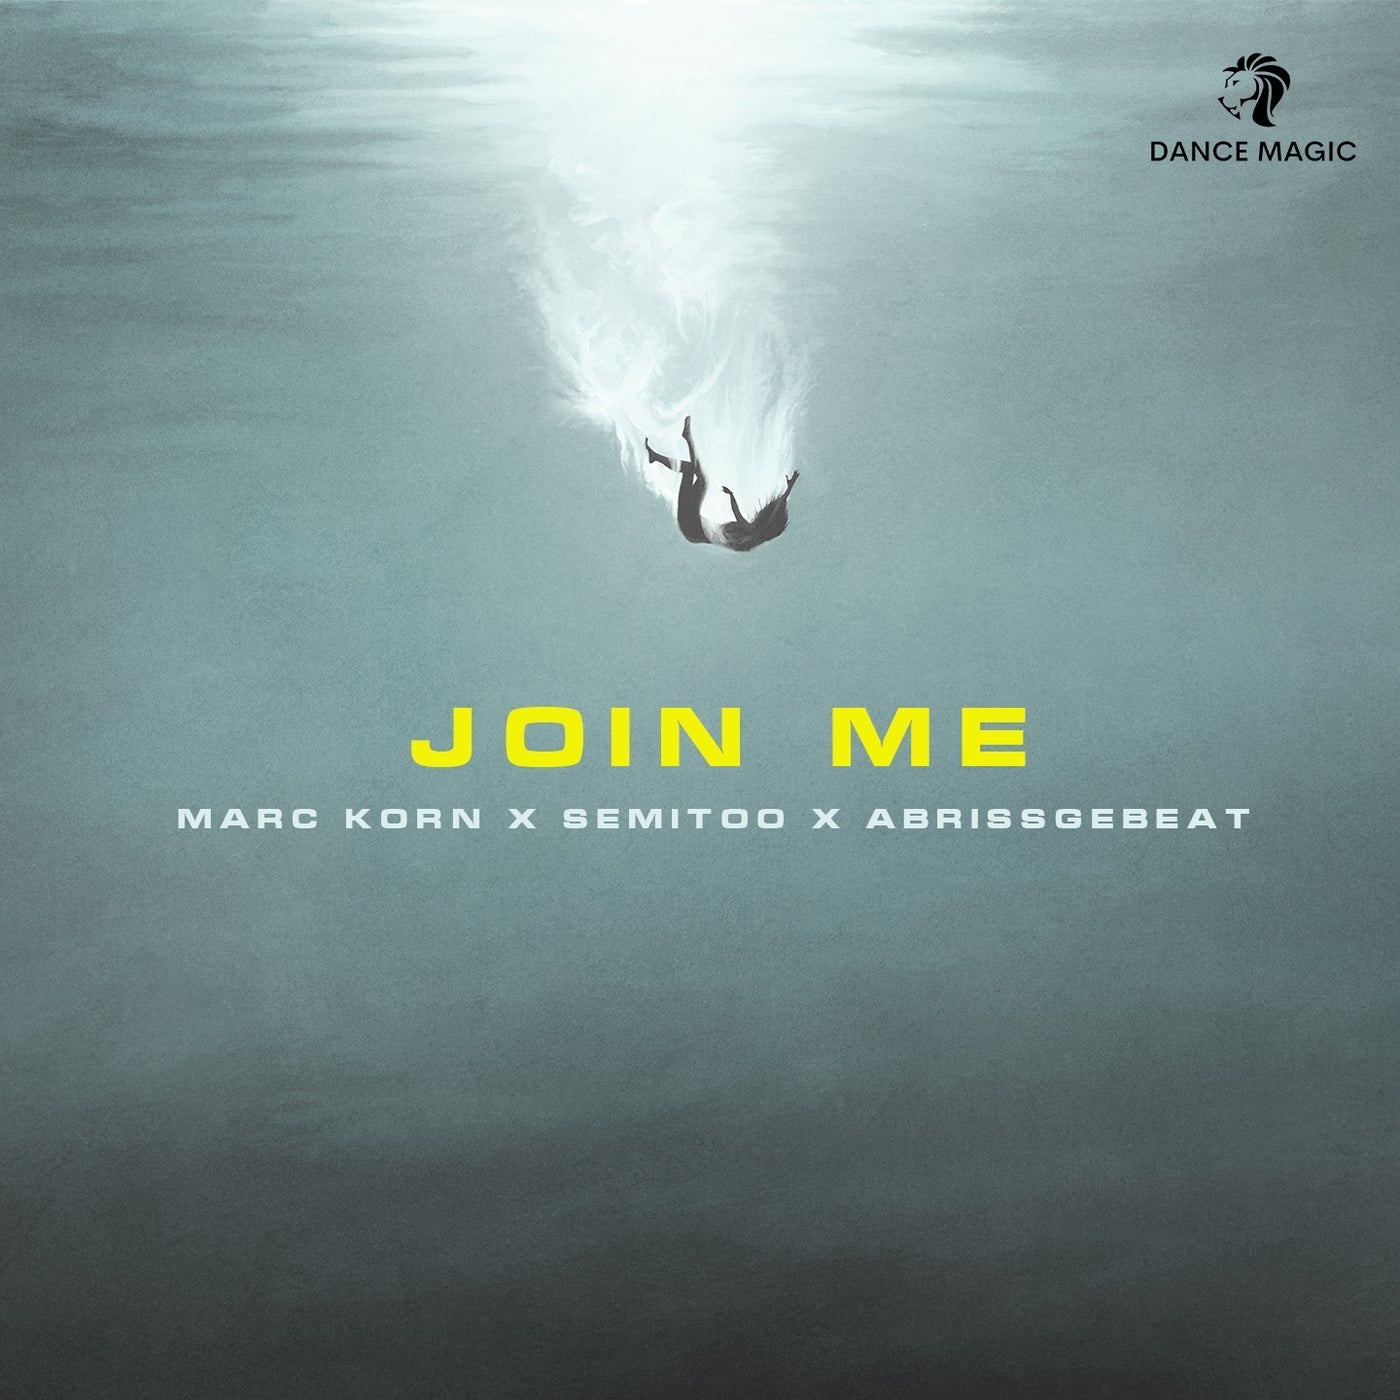 Marc Korn & Semitoo Feat. Abrissgebeat - Join Me (Extended Mix)